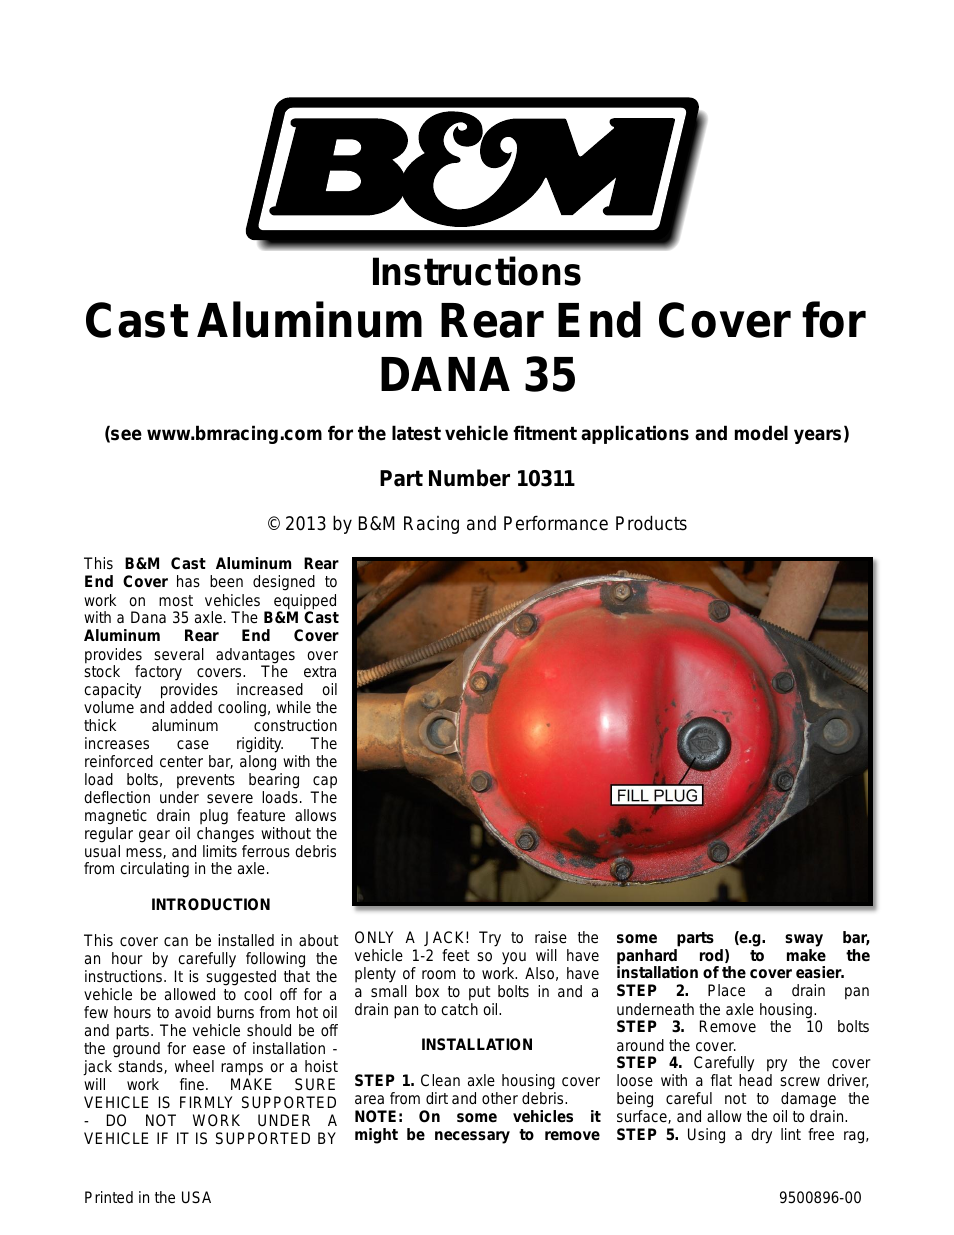 10311 CAST ALUMINUM REAR END COVER FOR DANA 35 WAS DESIGNED TO STRENGTHEN THE REAR END BY PREVENTING CASE